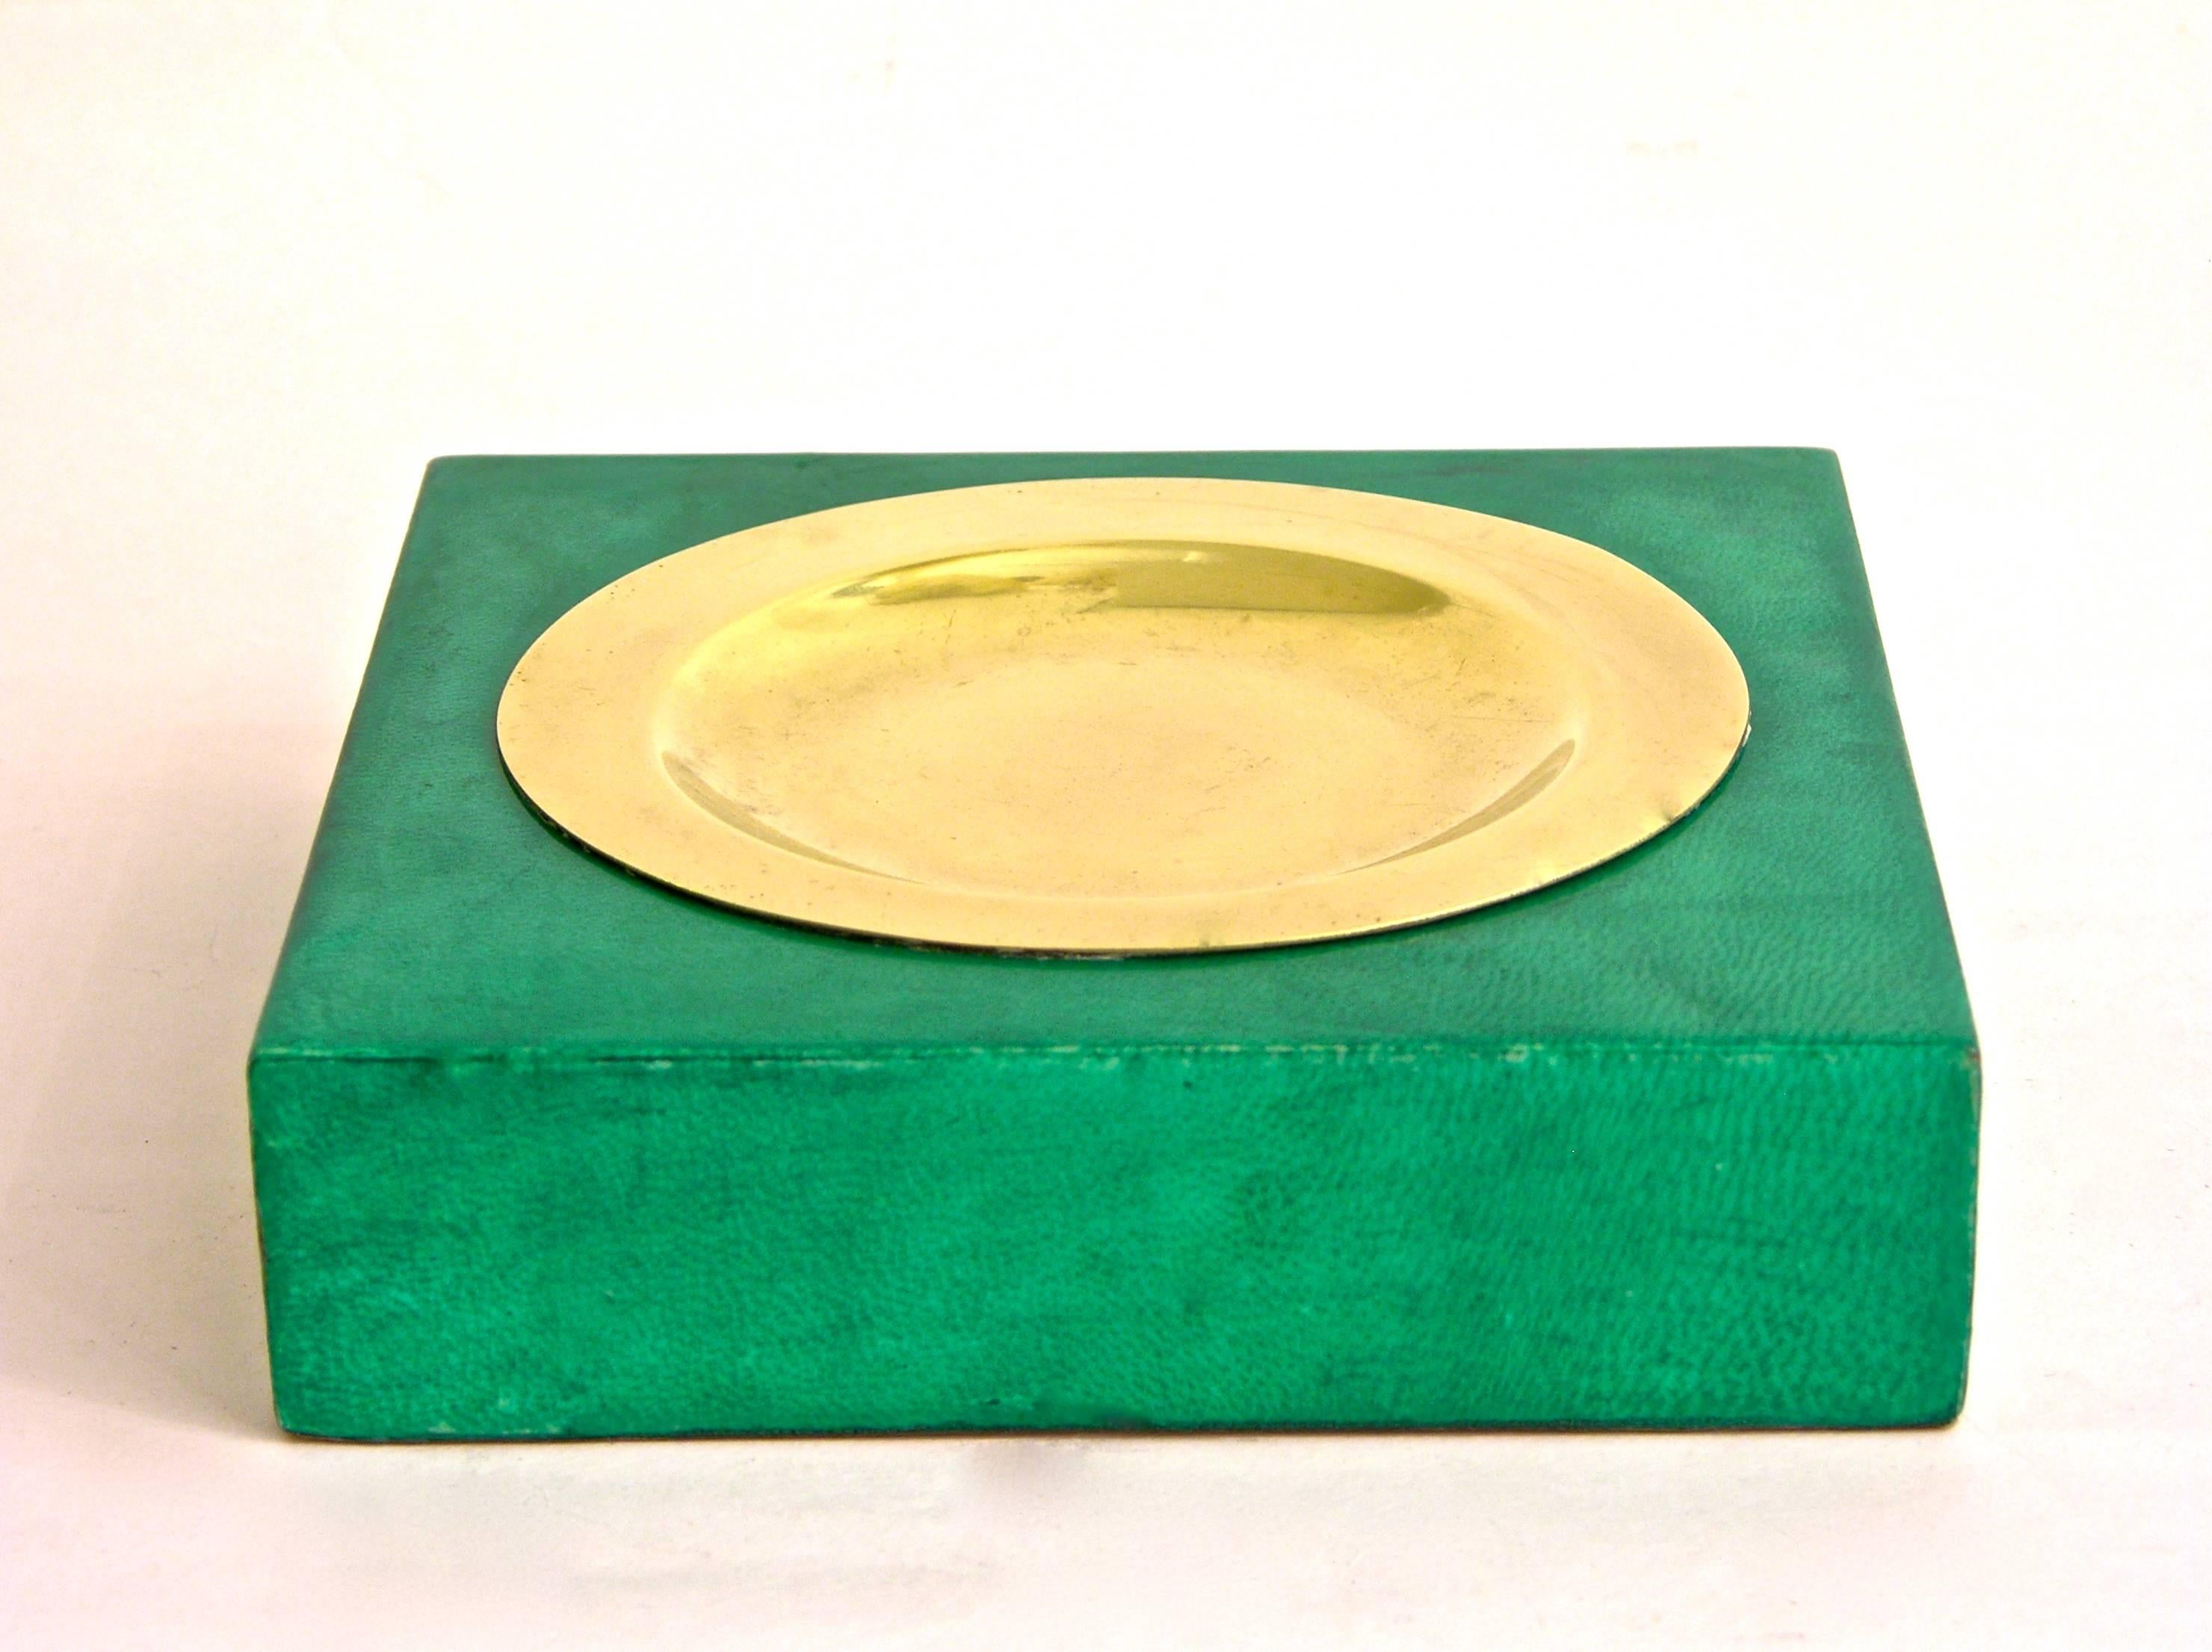 1970s Italian trinket bowl / vide-poche, entirely hand made in fabulous green goatskin by Aldo Tura with a bronze round tray.